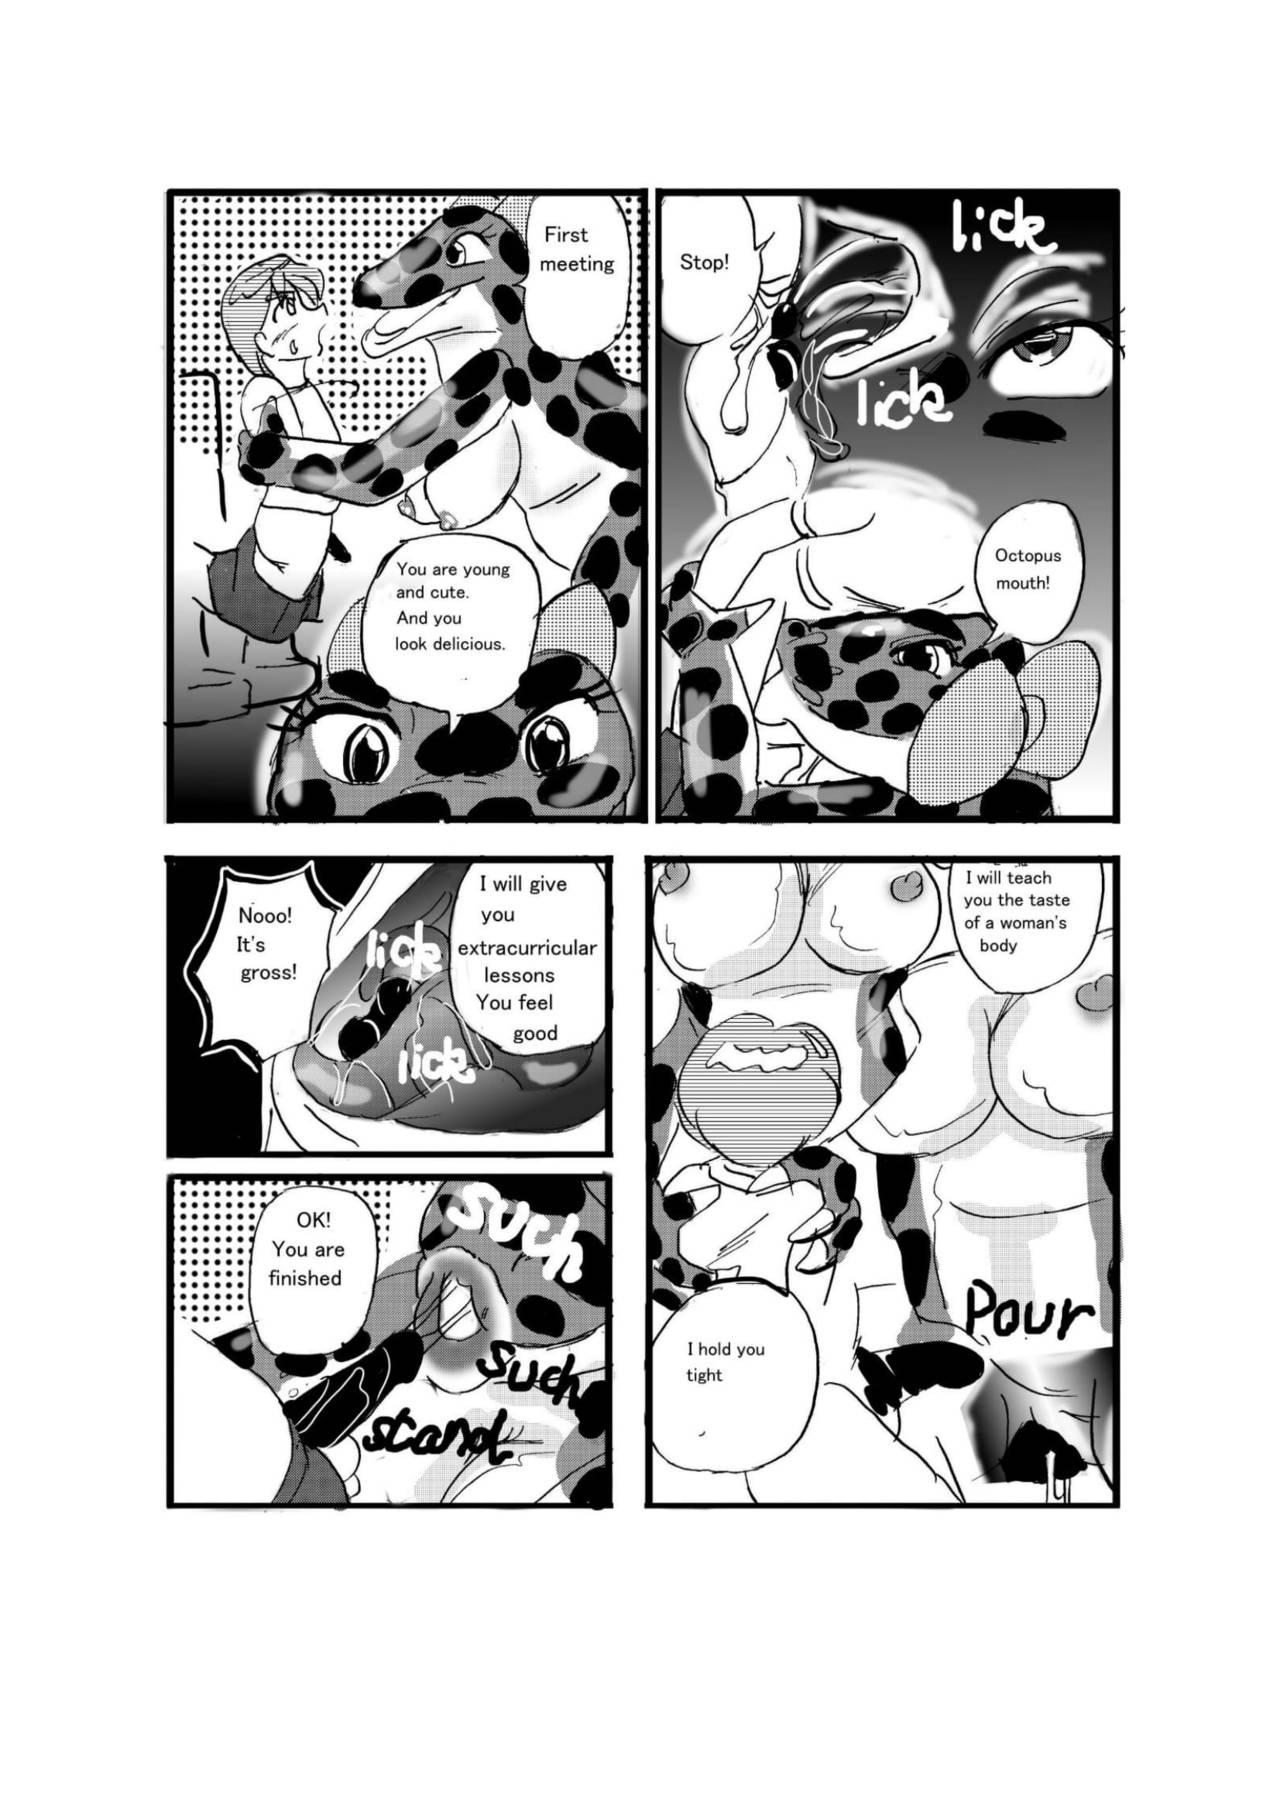 Anal Porn Swallowed Whole vol.2 Waniko + What's Digestion? - Original 4some - Page 4